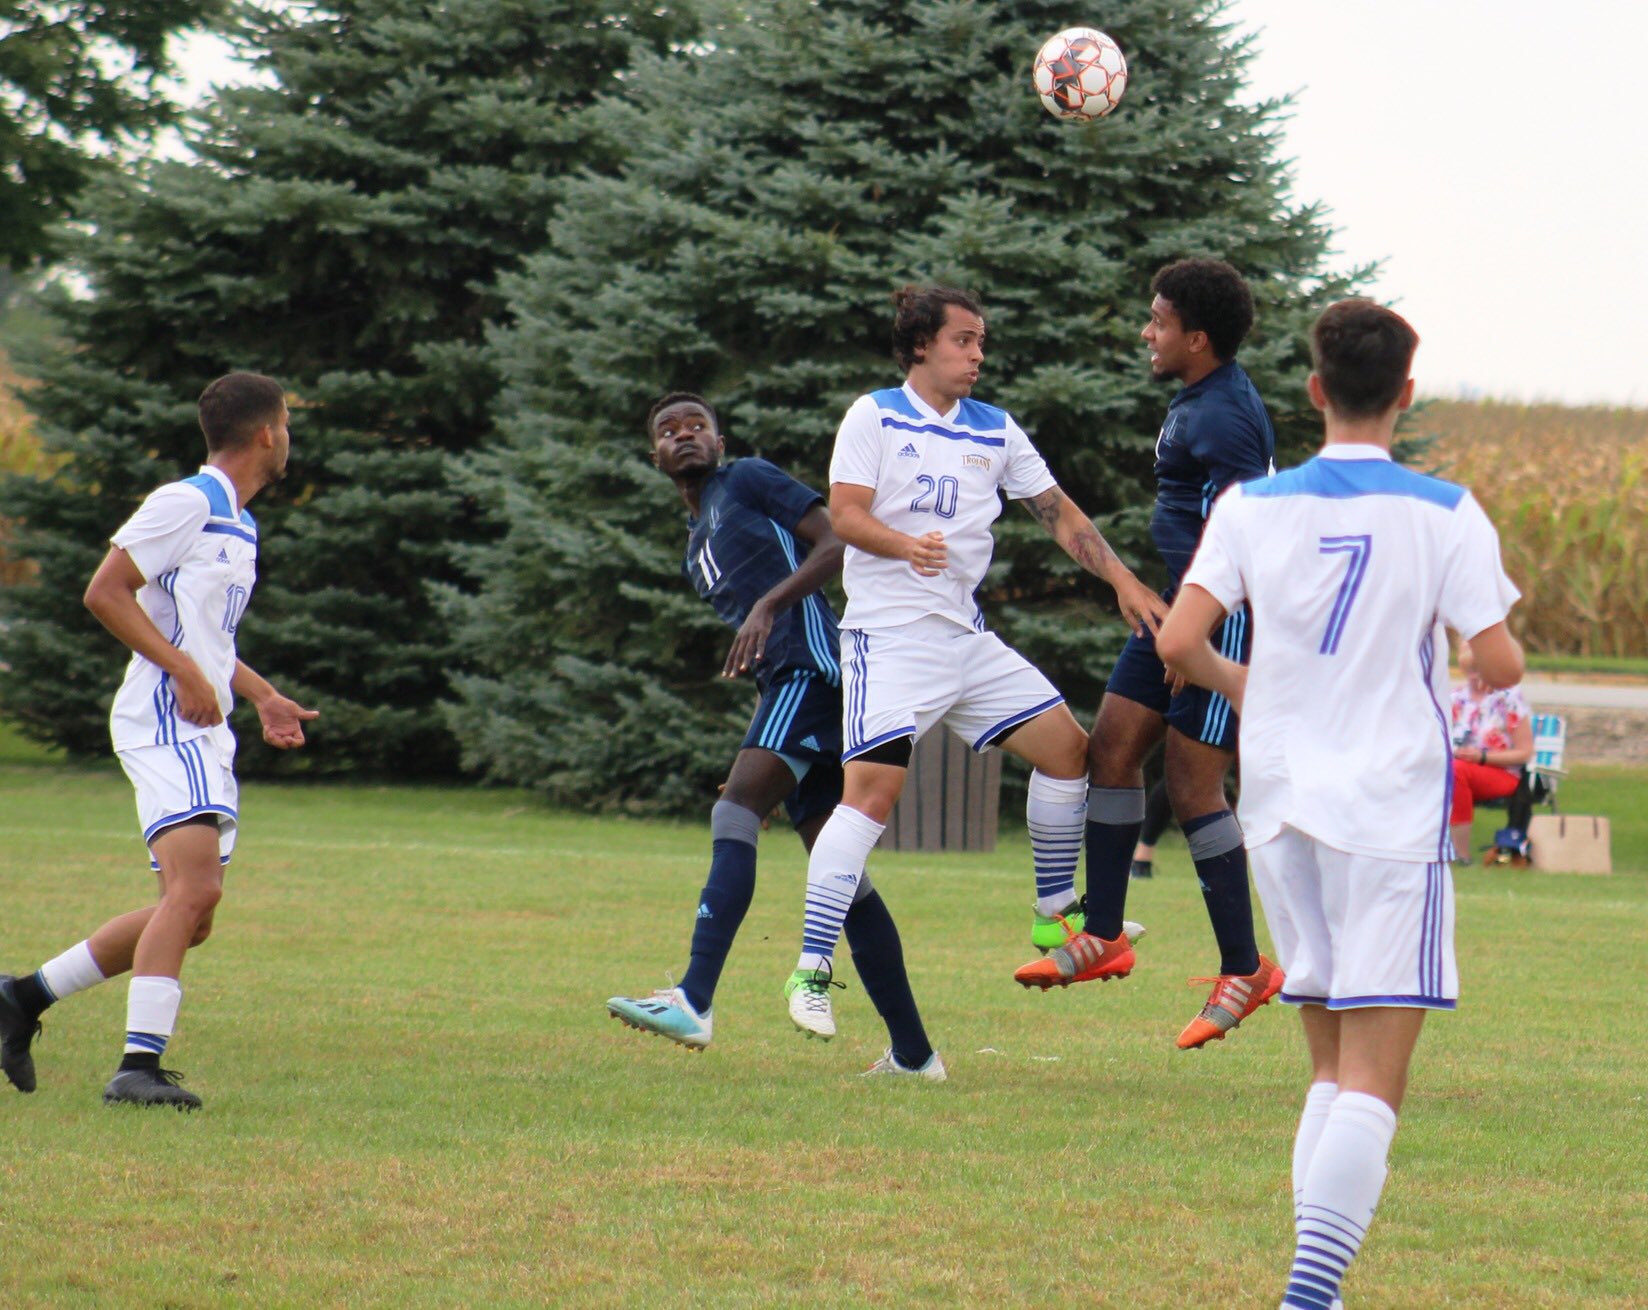 Tritons get past NIACC on road